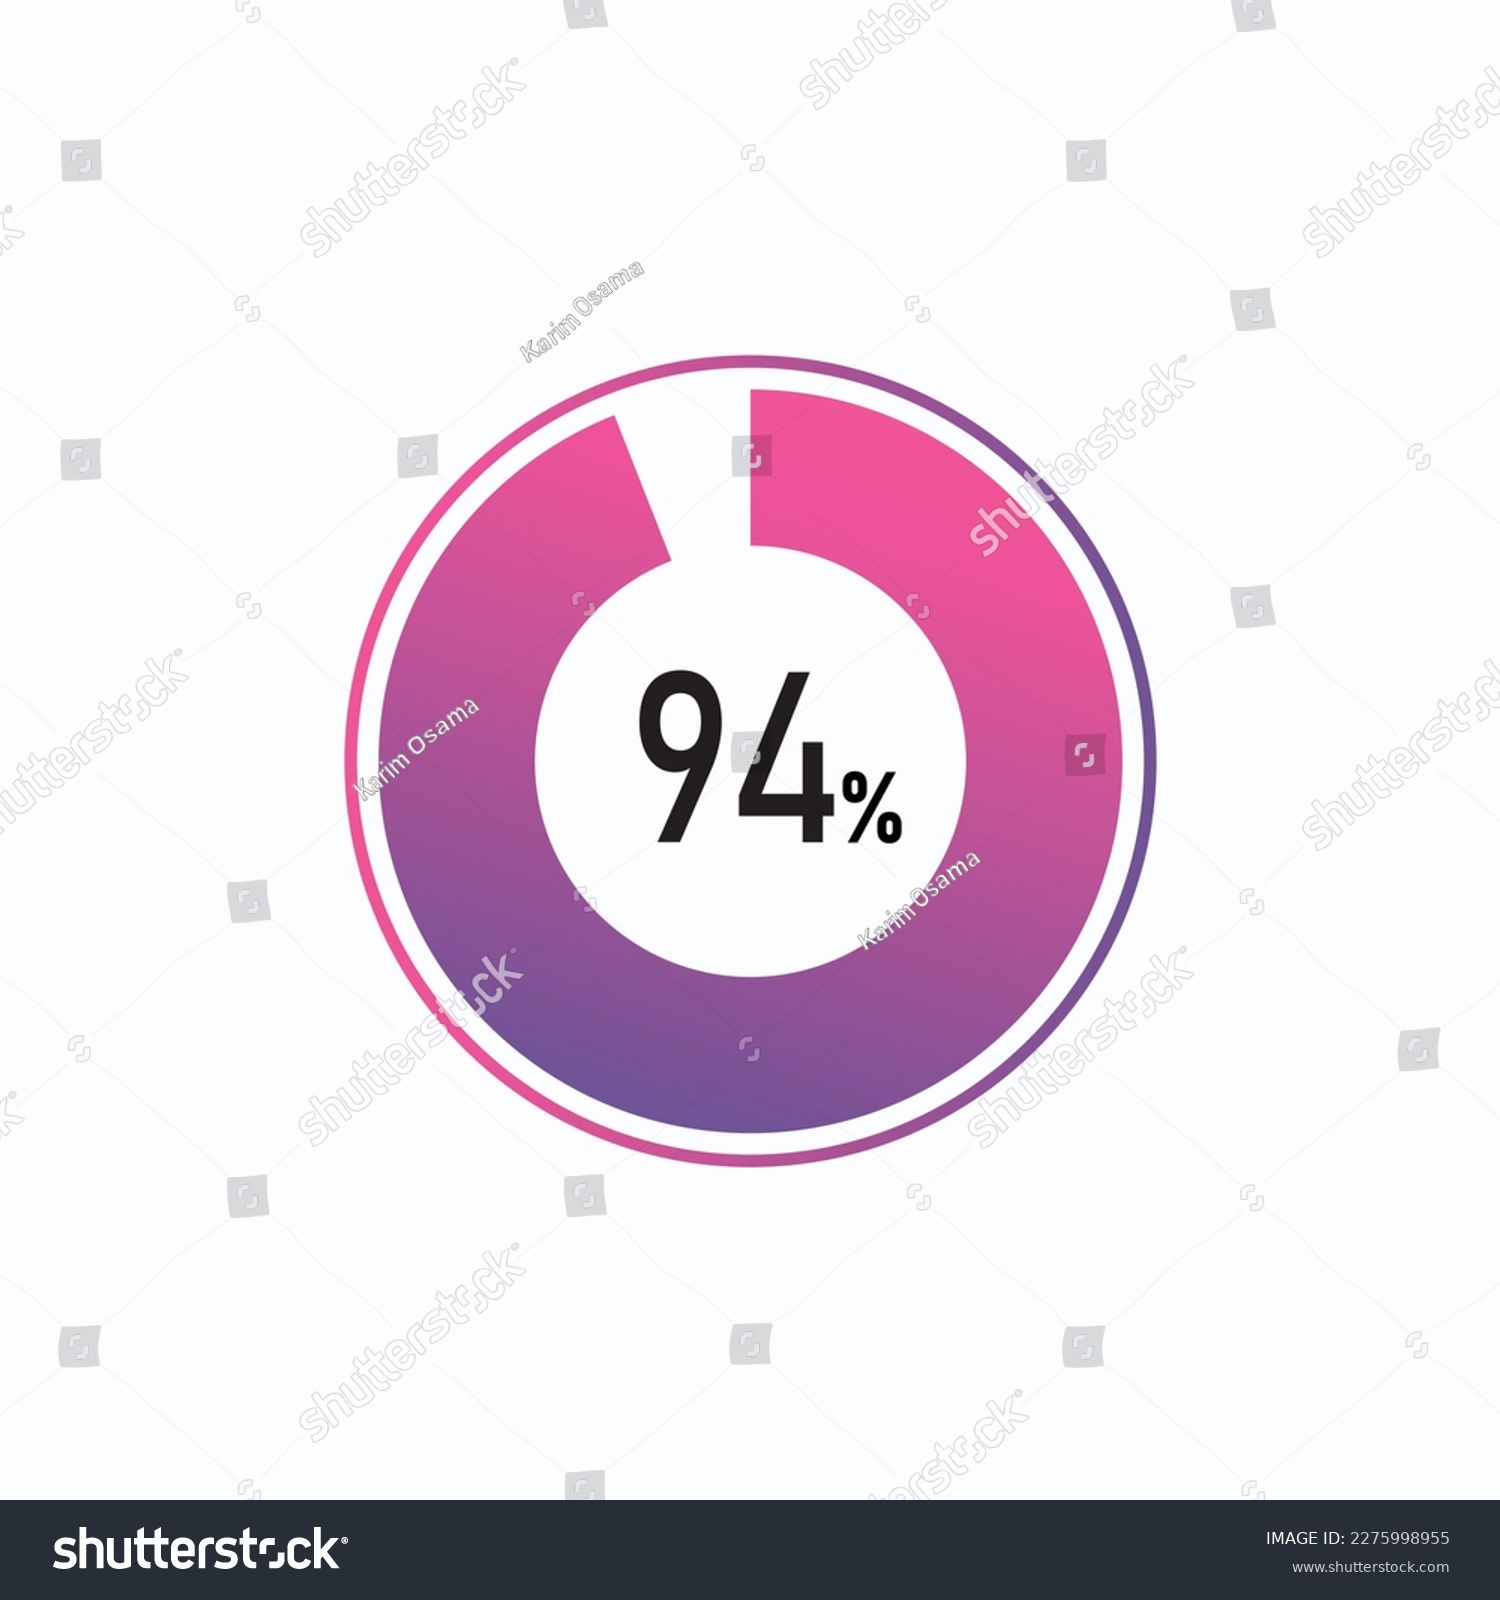 SVG of 94 percents pie chart infographic elements. 94% percentage infographic circle icons for download, illustration, business, web design. svg